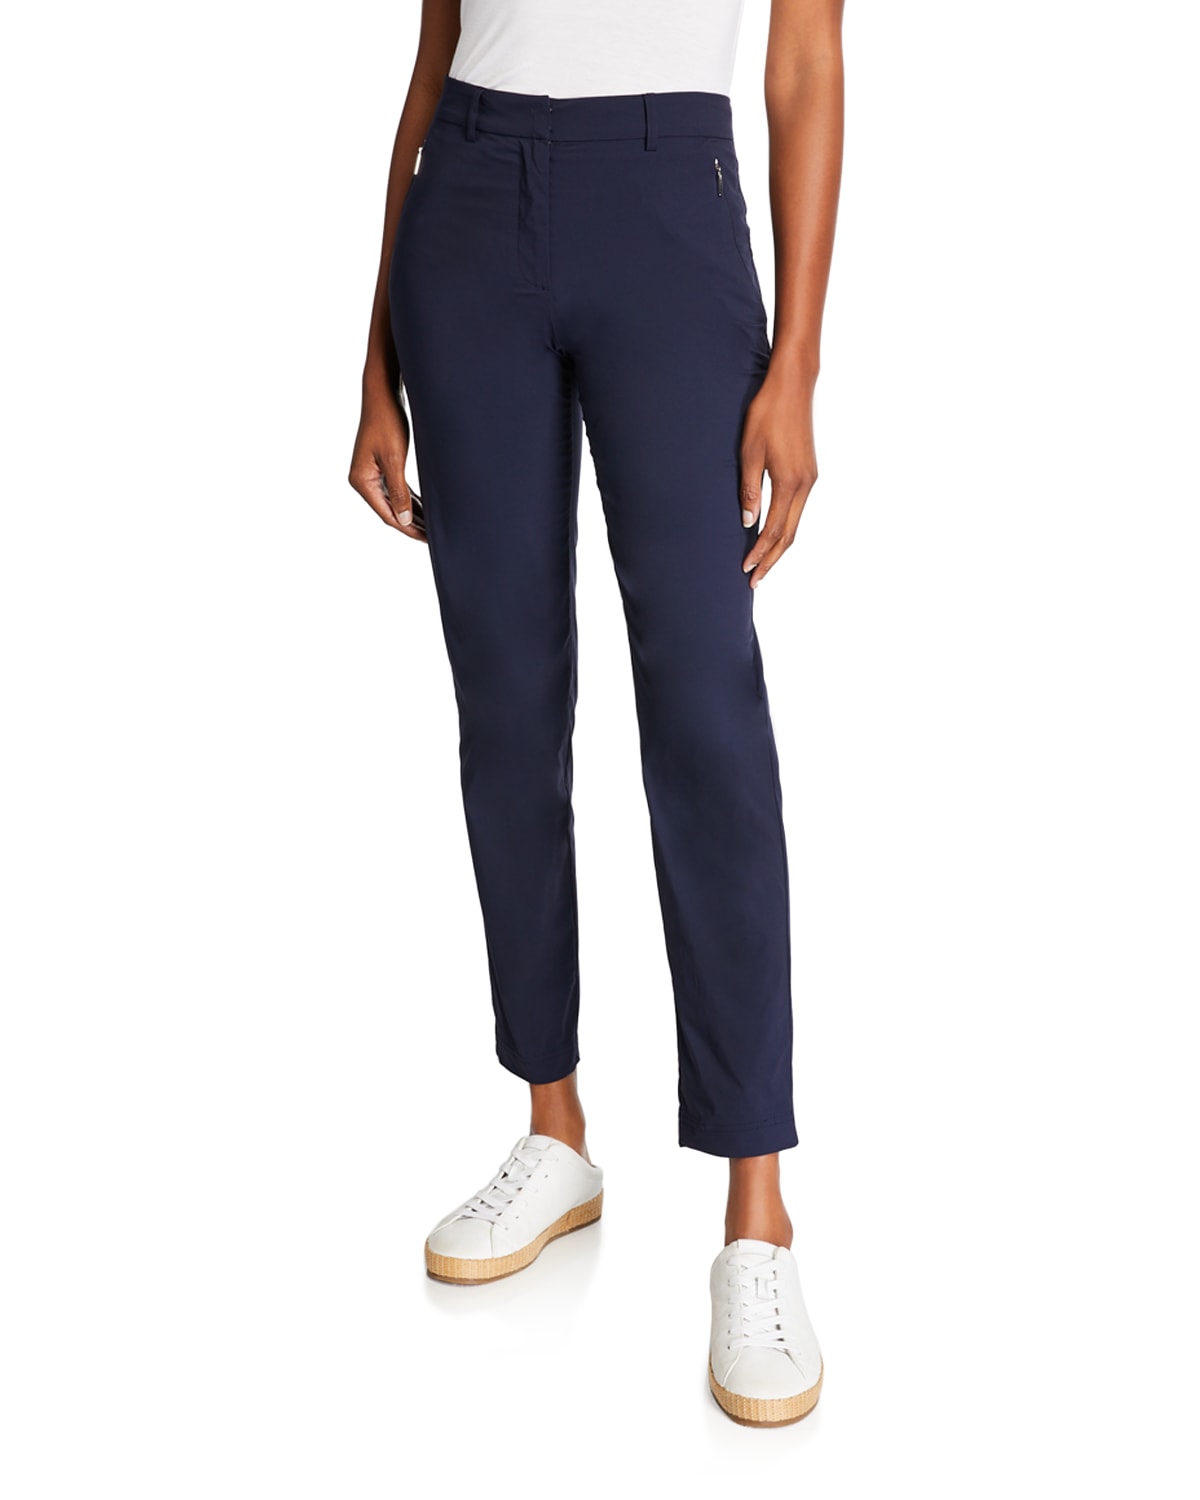 Anatomie Thea Ankle Pants with Zipper Side Pockets